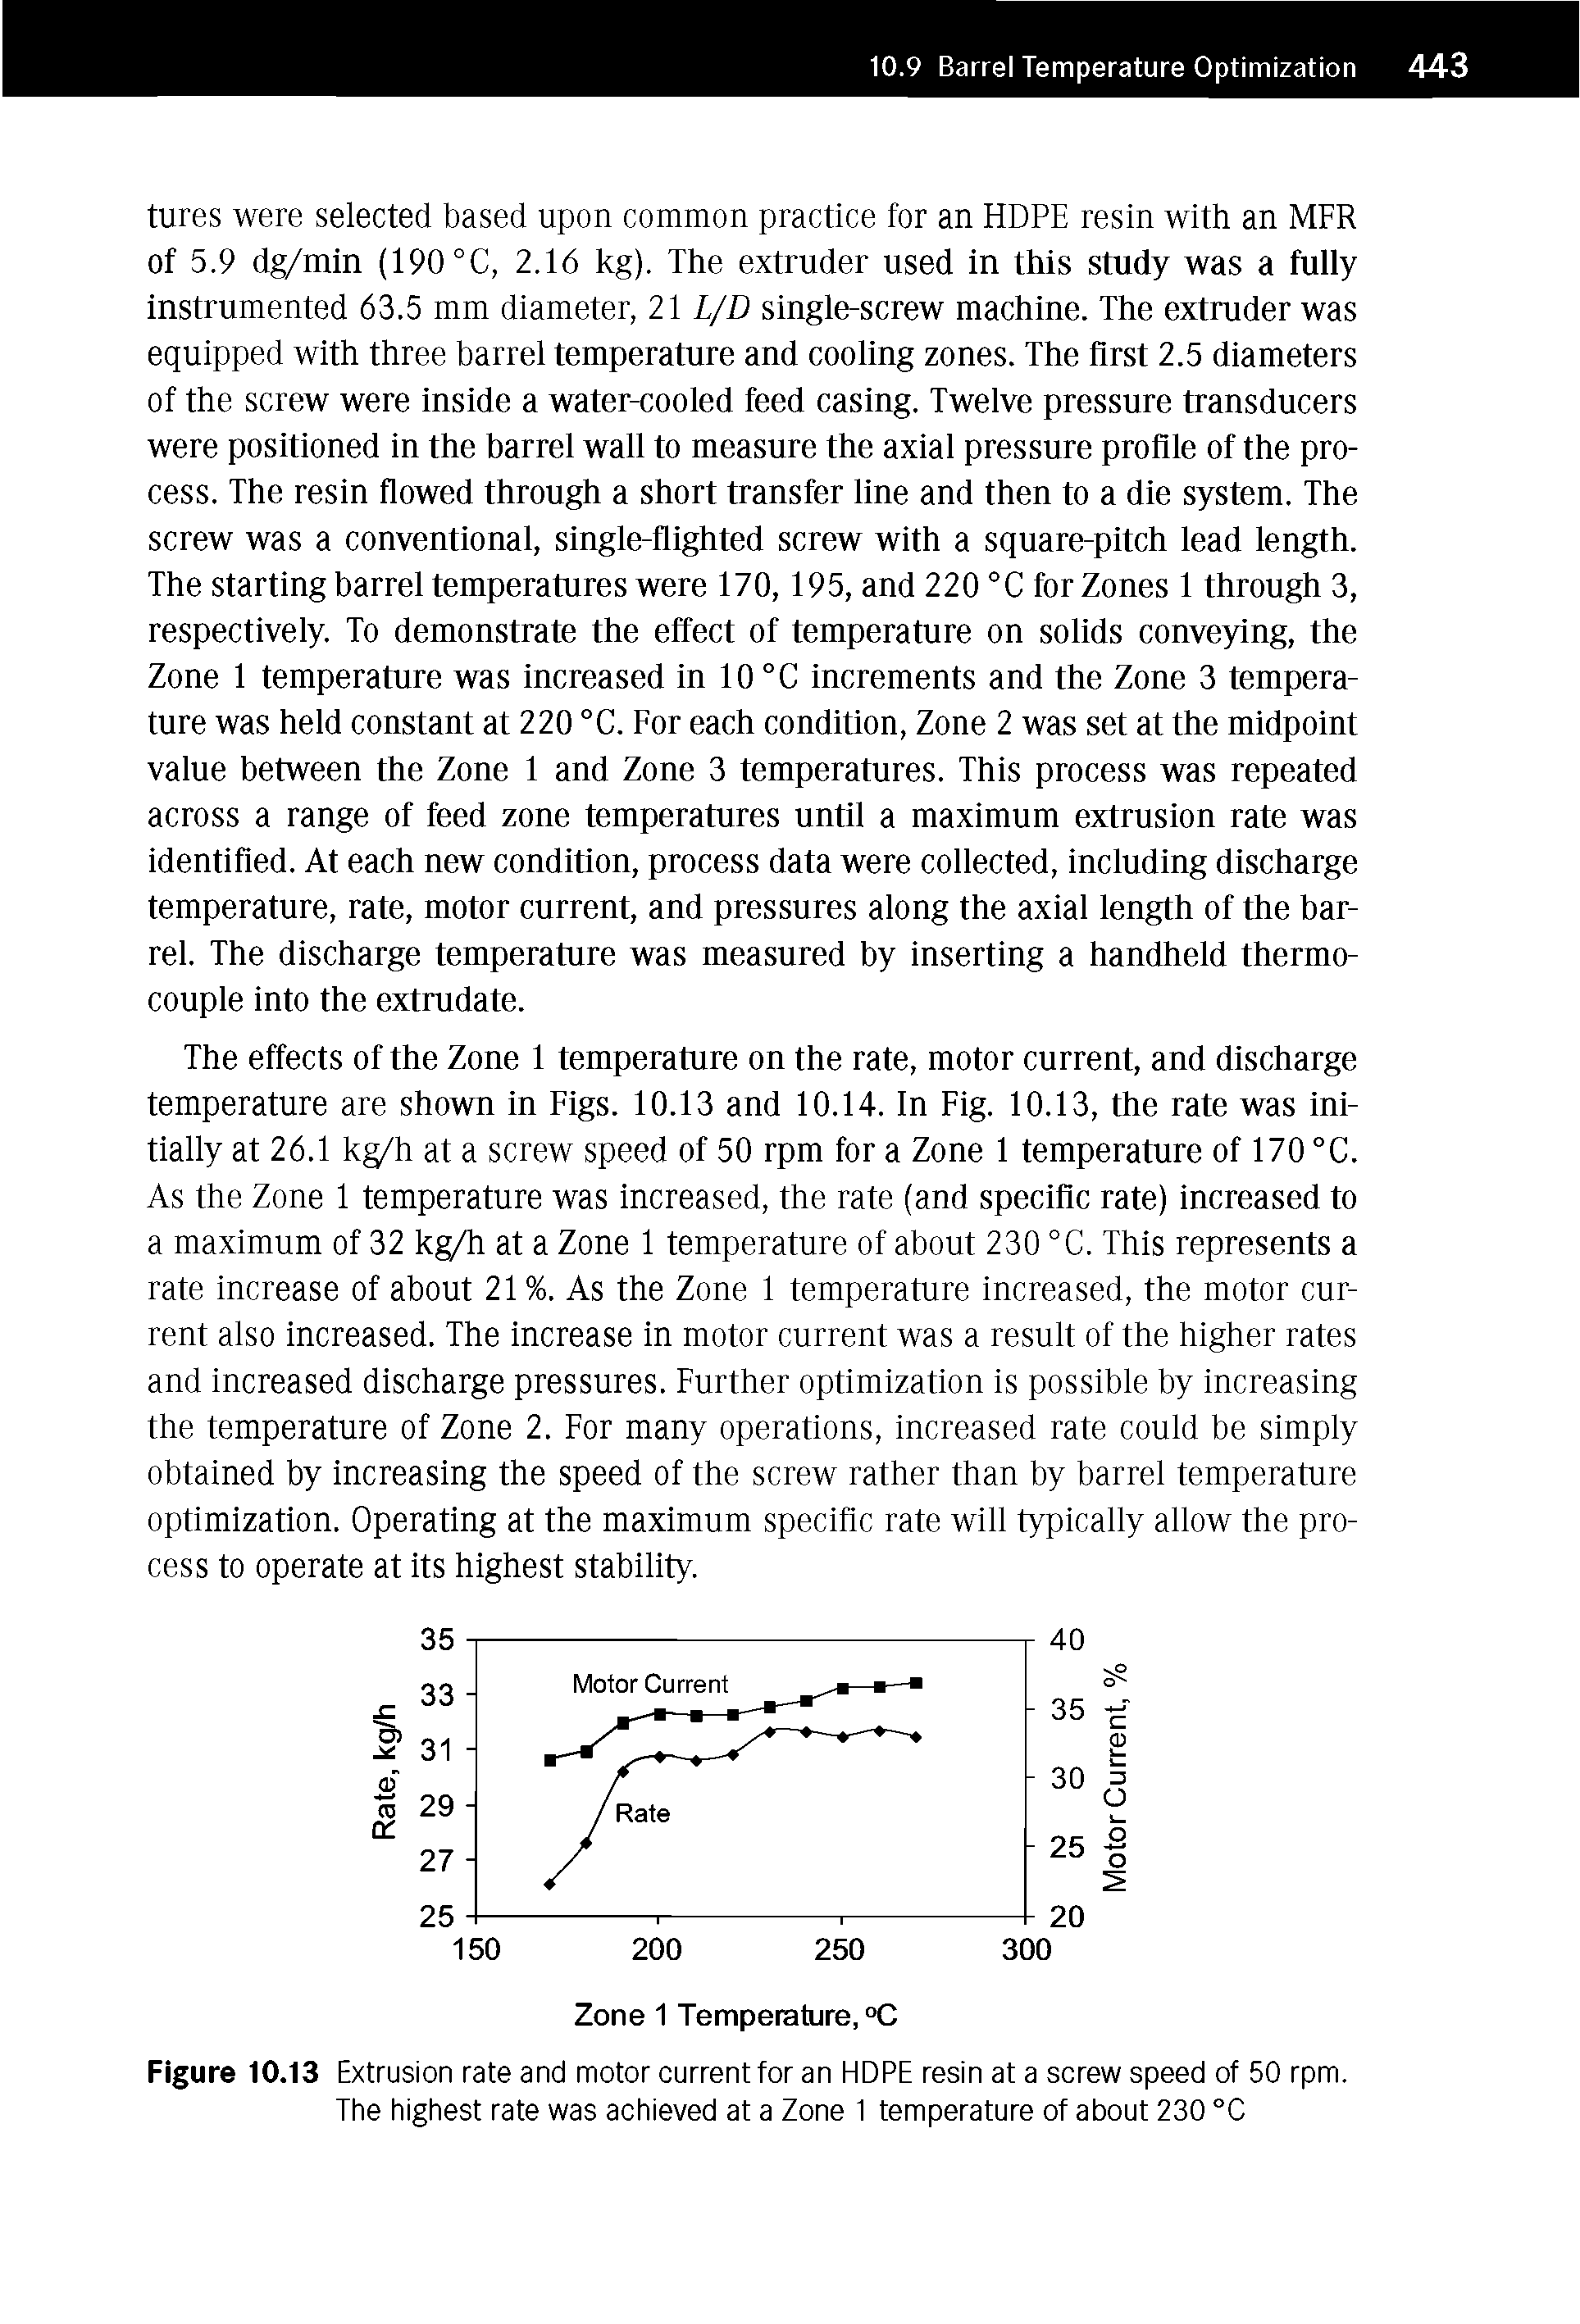 Figure 10.13 Extrusion rate and motor current for an HDPE resin at a screw speed of 50 rpm. The highest rate was achieved at a Zone 1 temperature of about 230 °C...